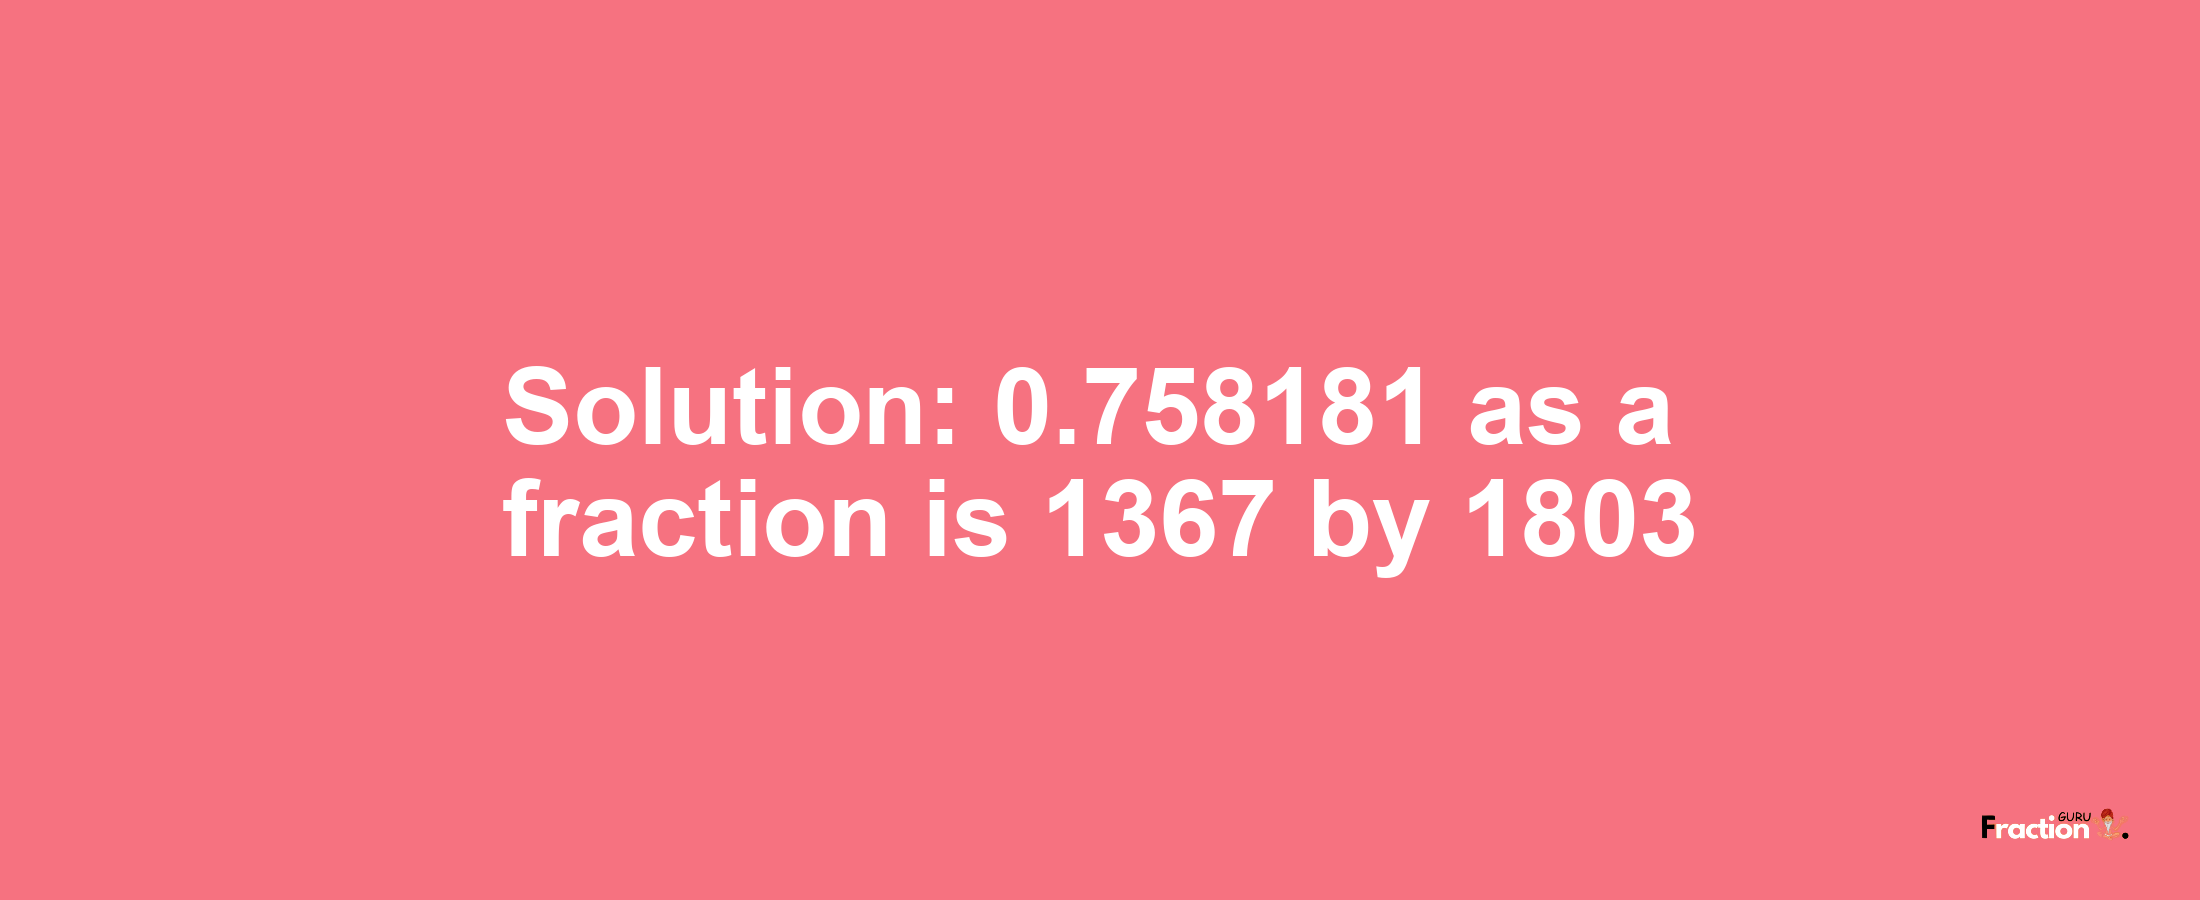 Solution:0.758181 as a fraction is 1367/1803